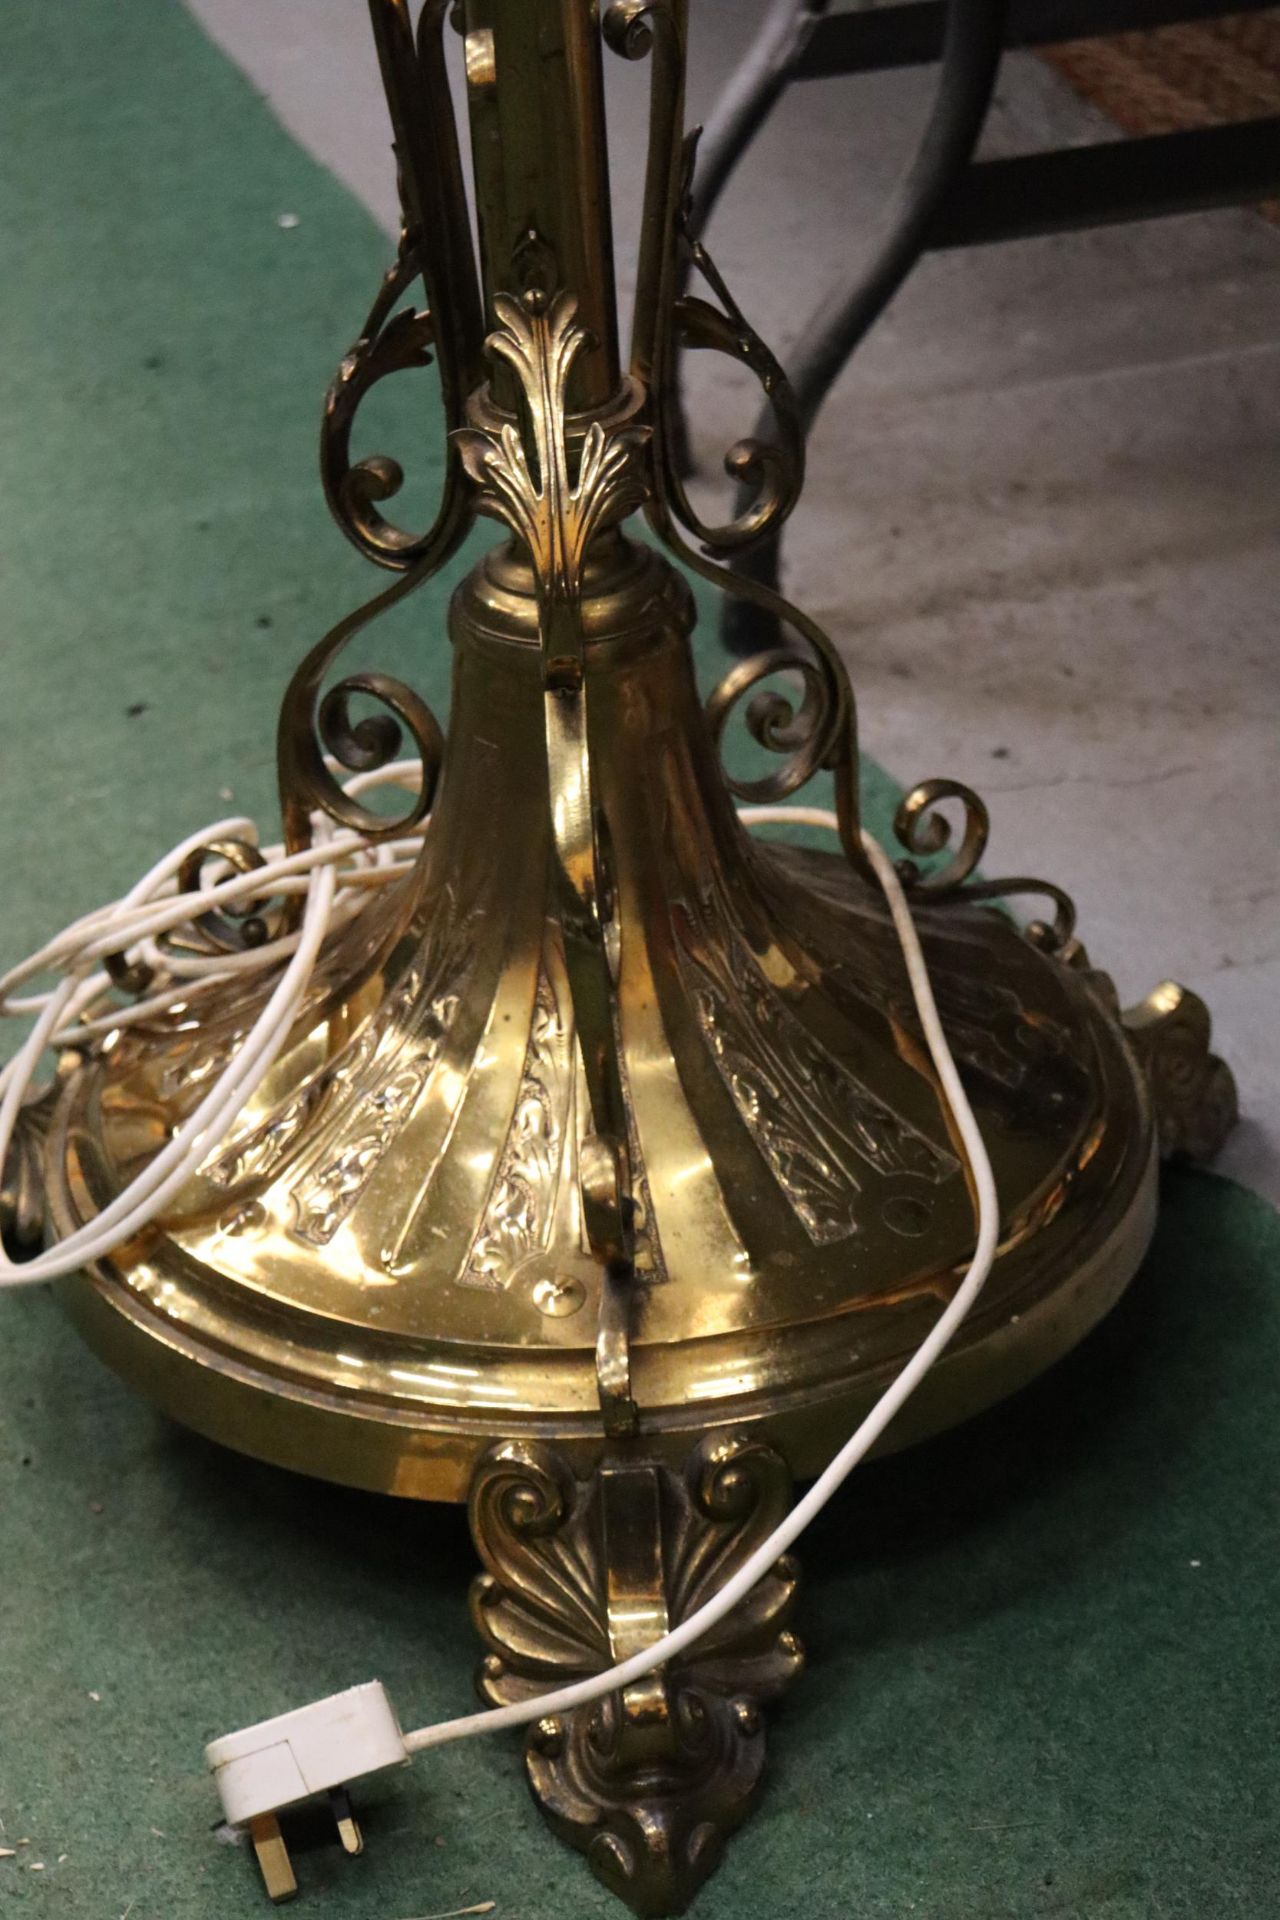 A FLOOR STANDING BRASS PUGIN STYLE CONVERTED CANDLESTICK WITH ORNAGE GLASS SHADE - Image 4 of 8